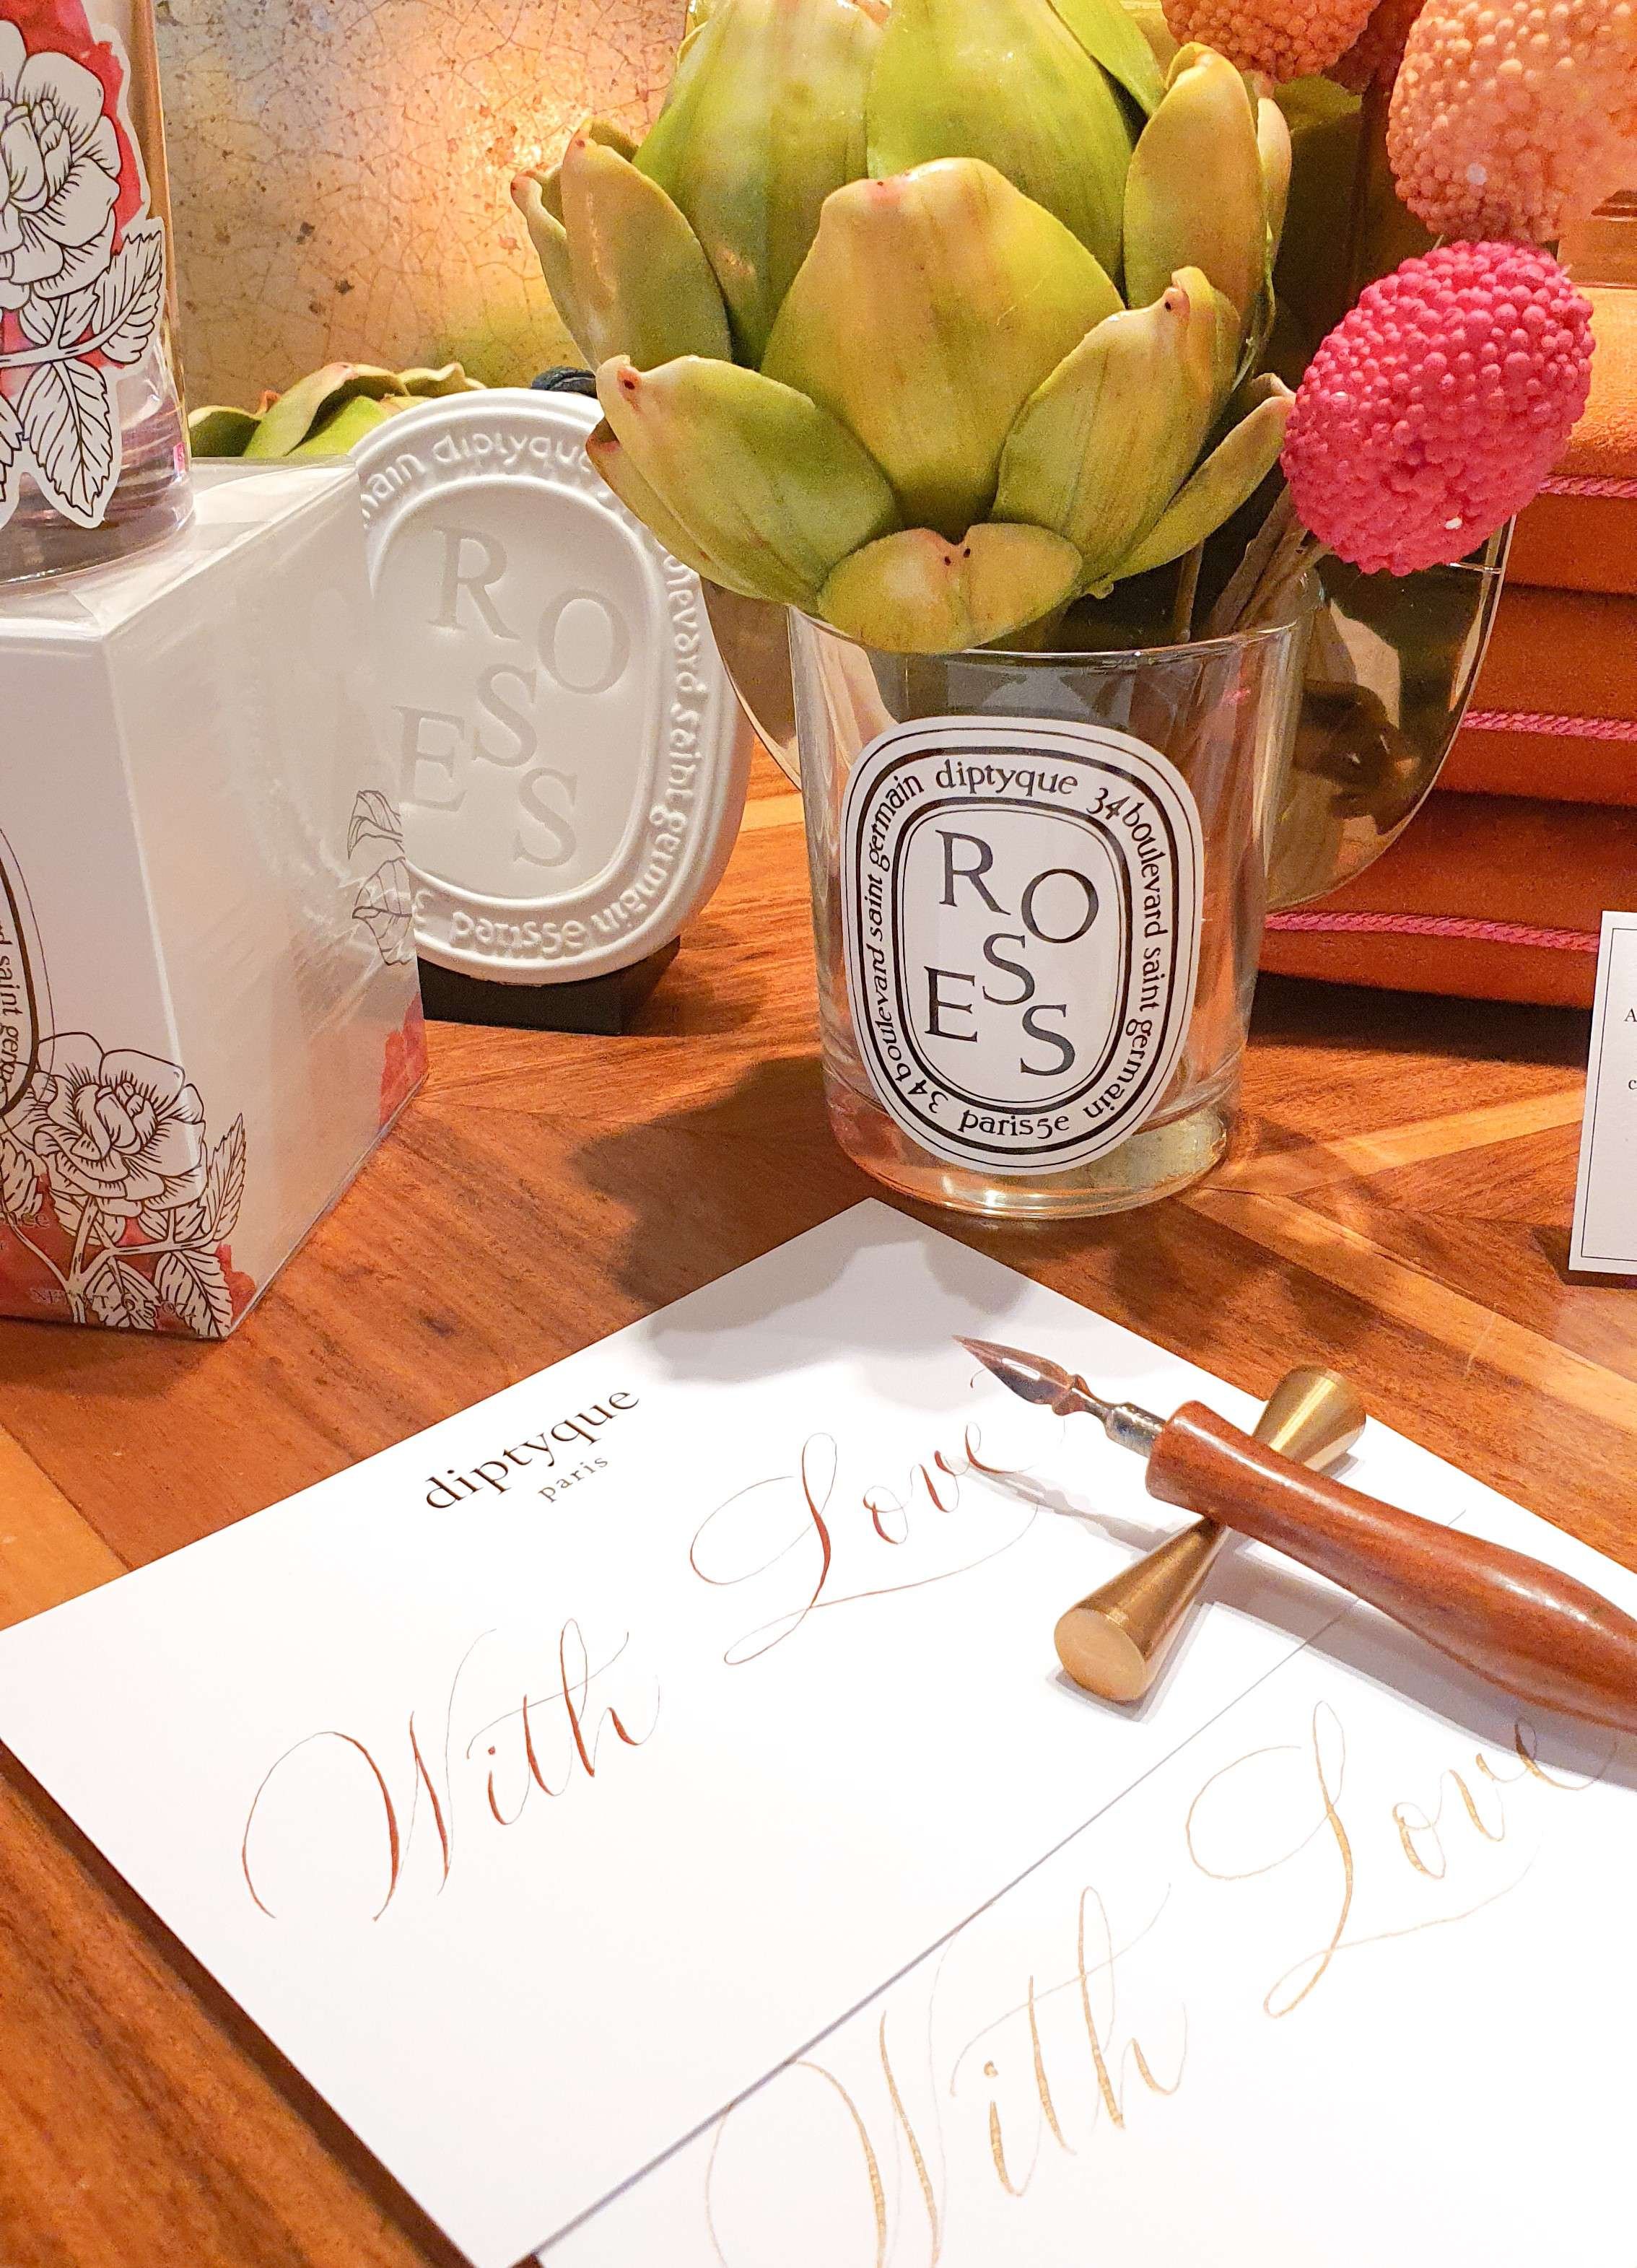 brand-activation-at-diptyque-in-london.jpg